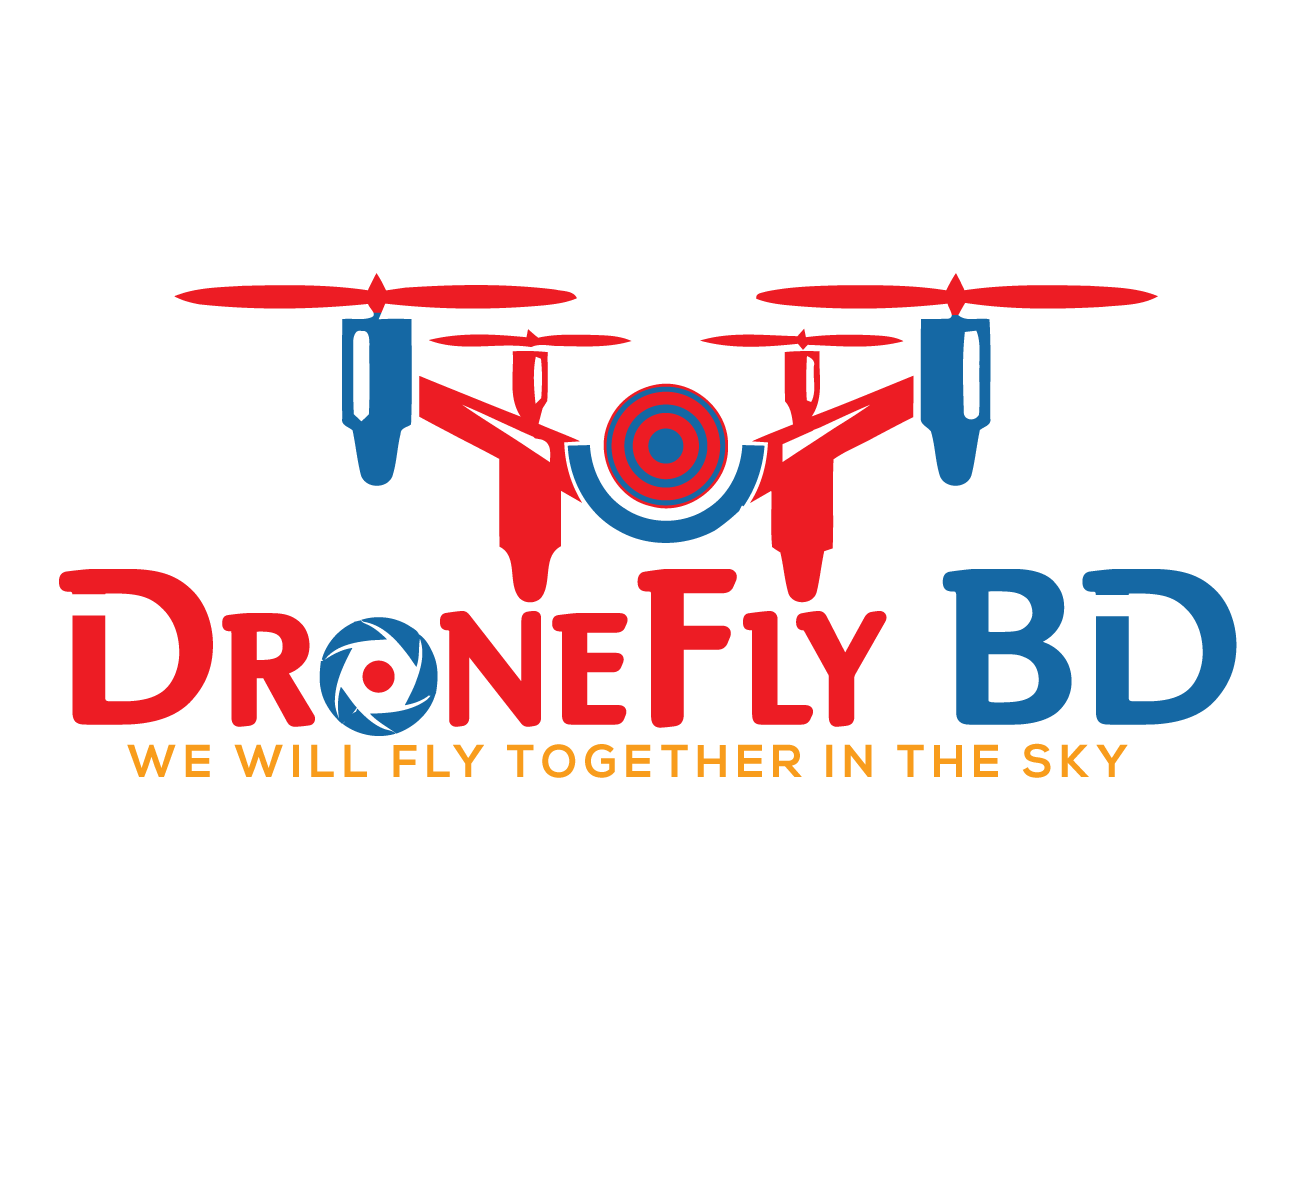 Drone Fly BD